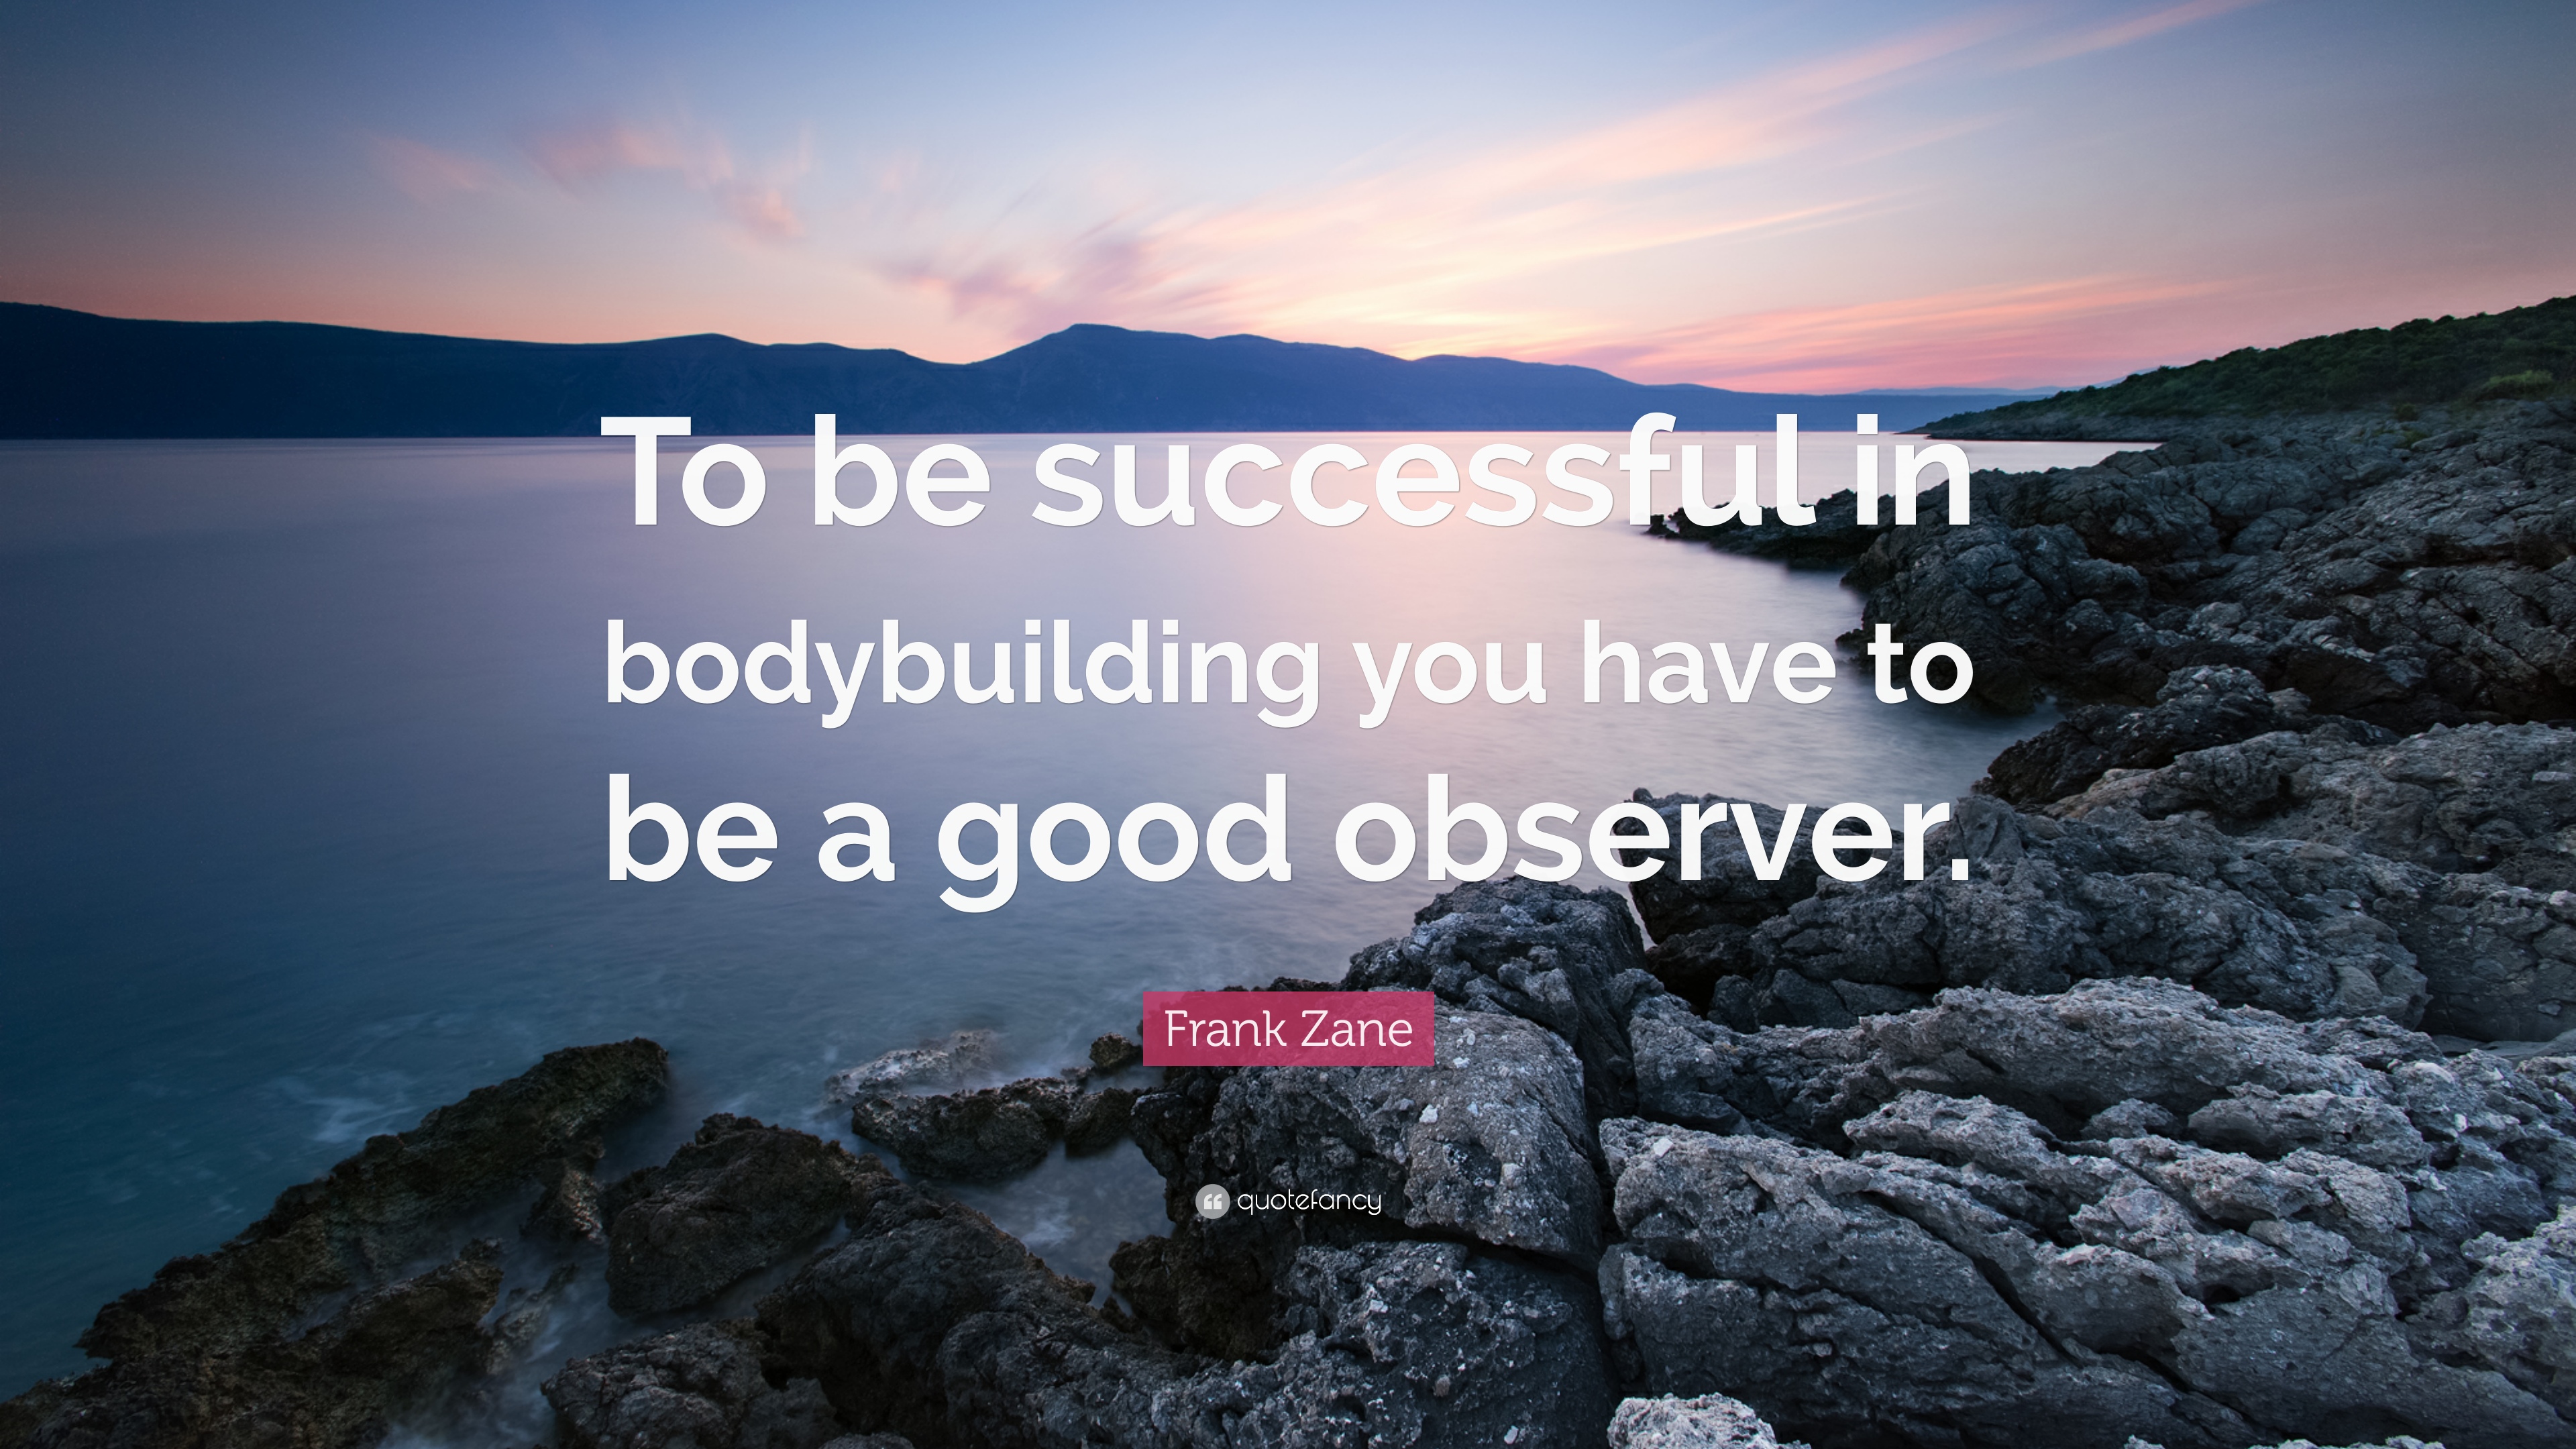 Frank Zane Quote: “To be successful in bodybuilding you have to be a